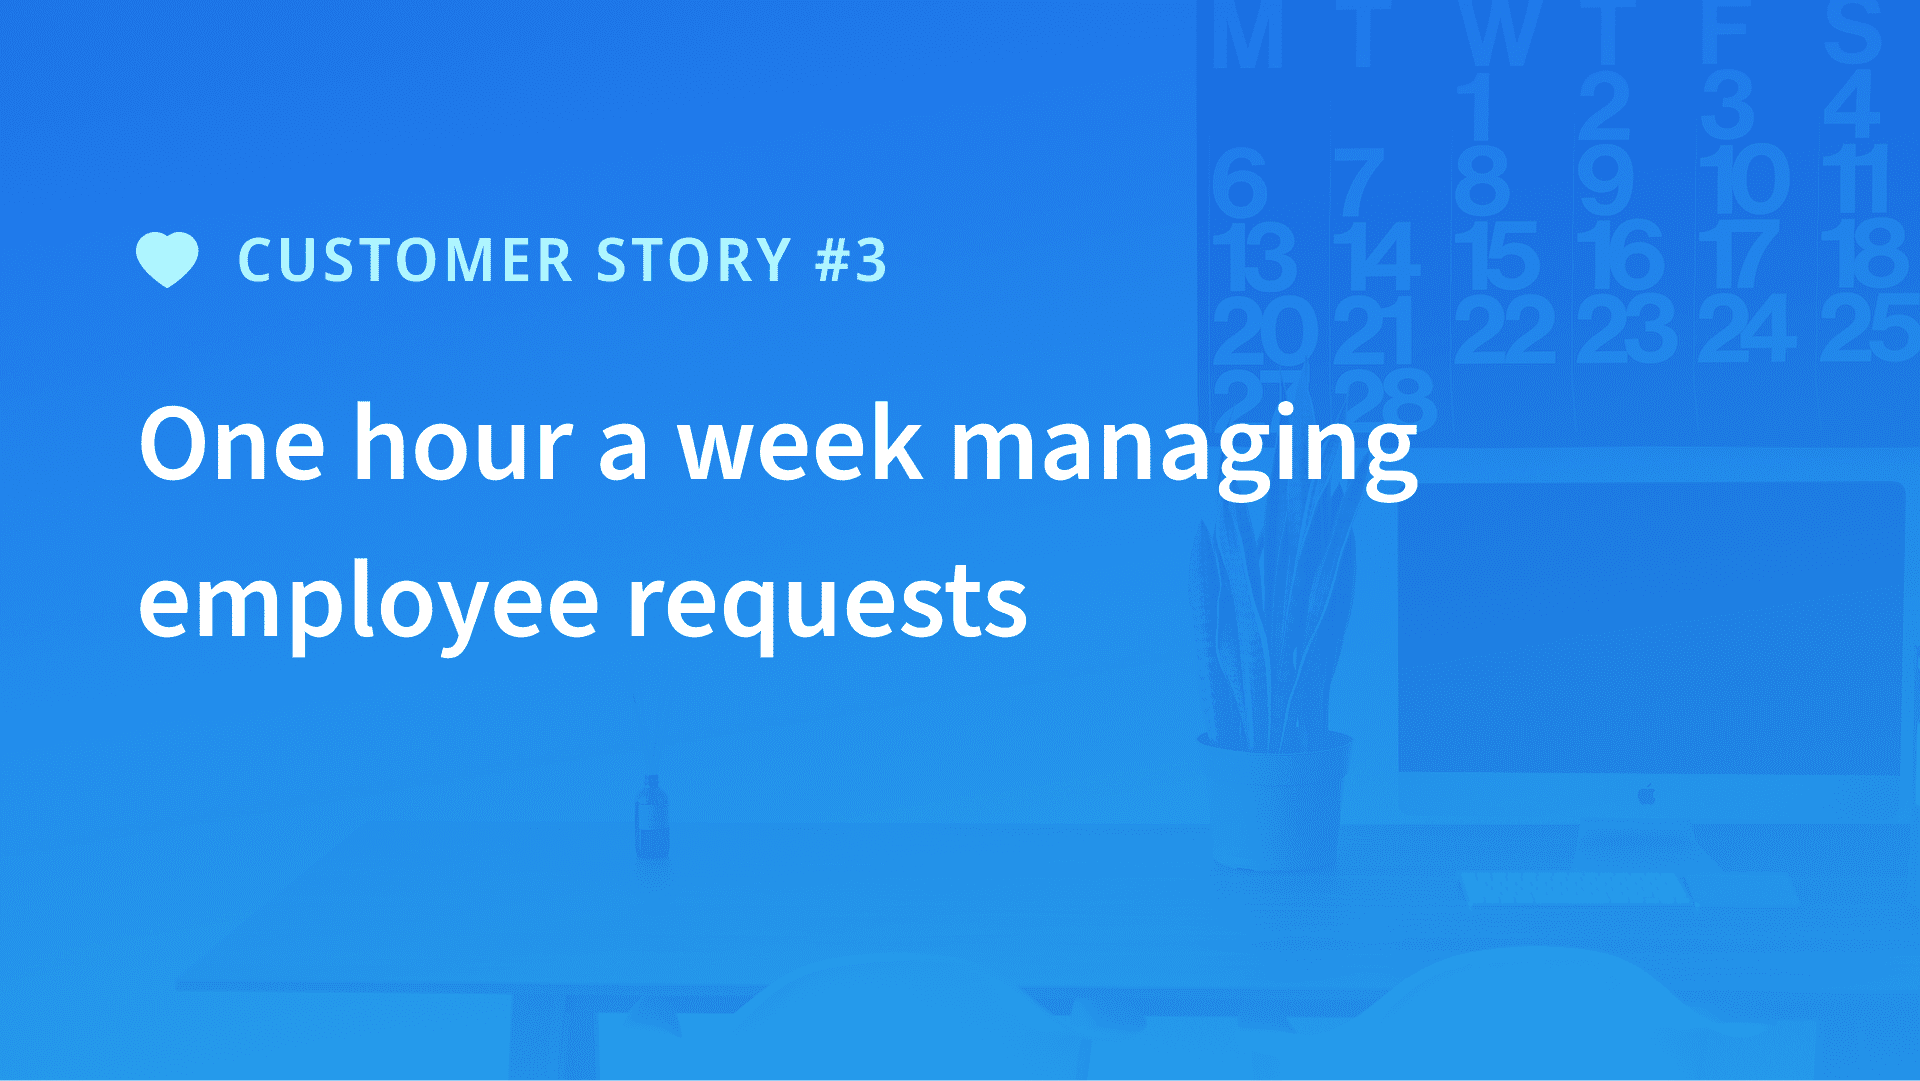 Upperside - One hour a week managing employee requets